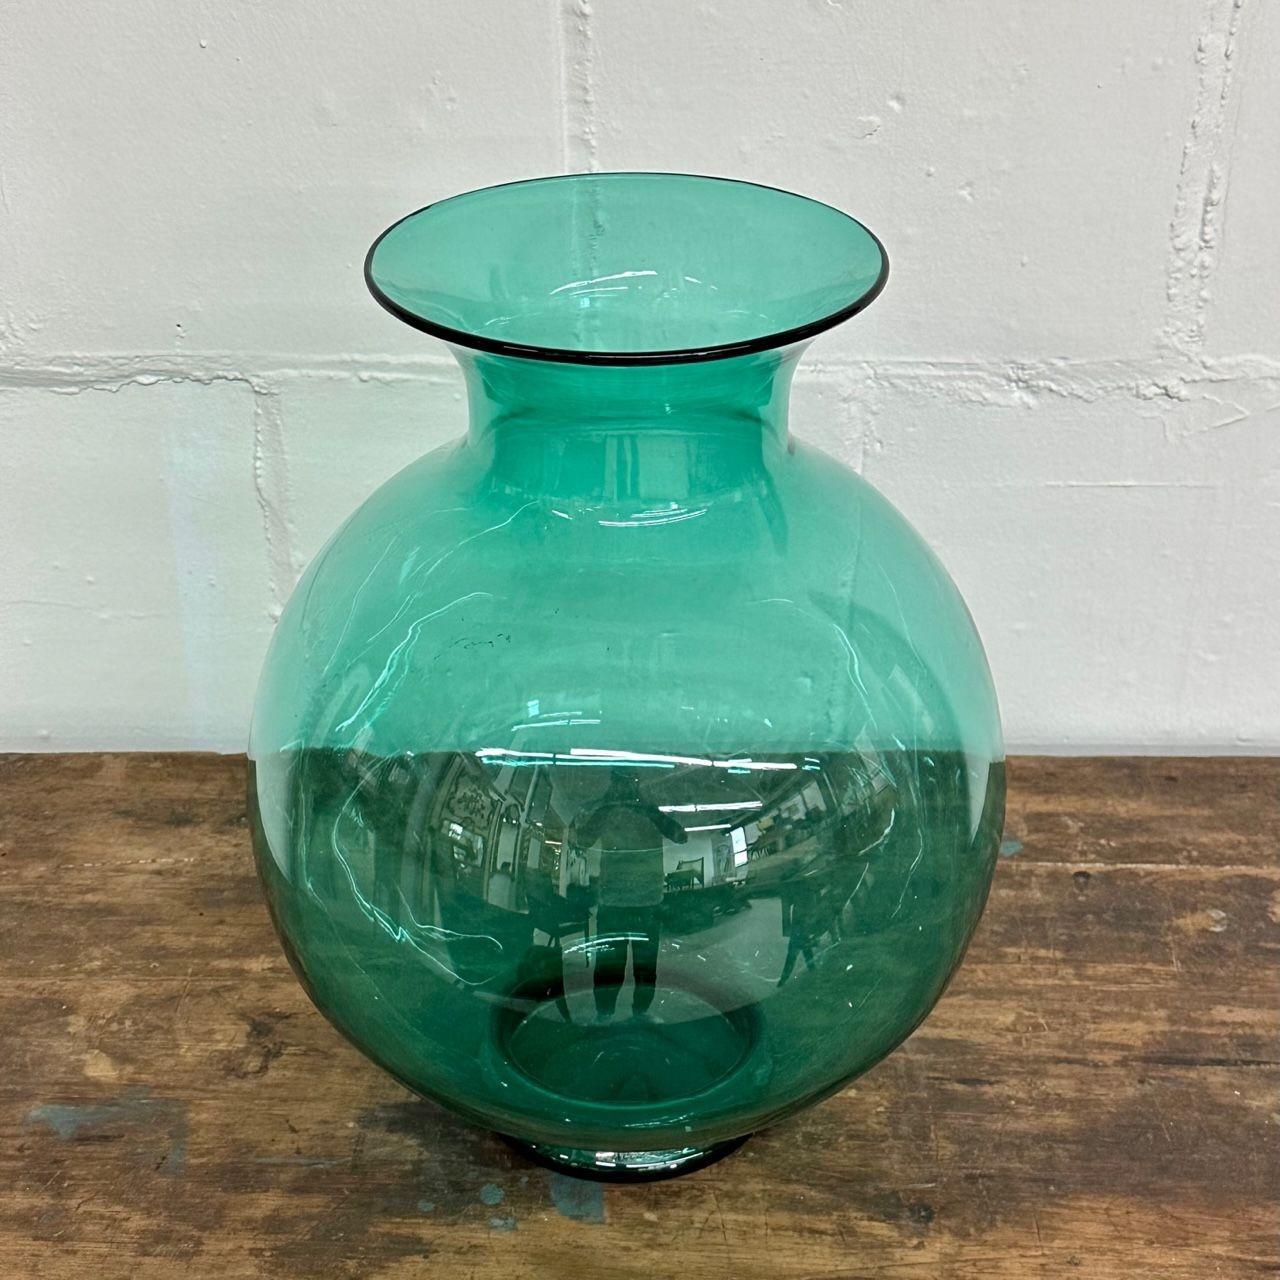 Large Mid-Century Modern hand blown Glass Turquoise Table Vase / Vessel by Blenko
 
Spherical teal hand blown glass flower vase or centerpiece by Blenko Glassworks.
 
Hand Blown Glass
United States, circa 1960s
 
Opening is 7.5